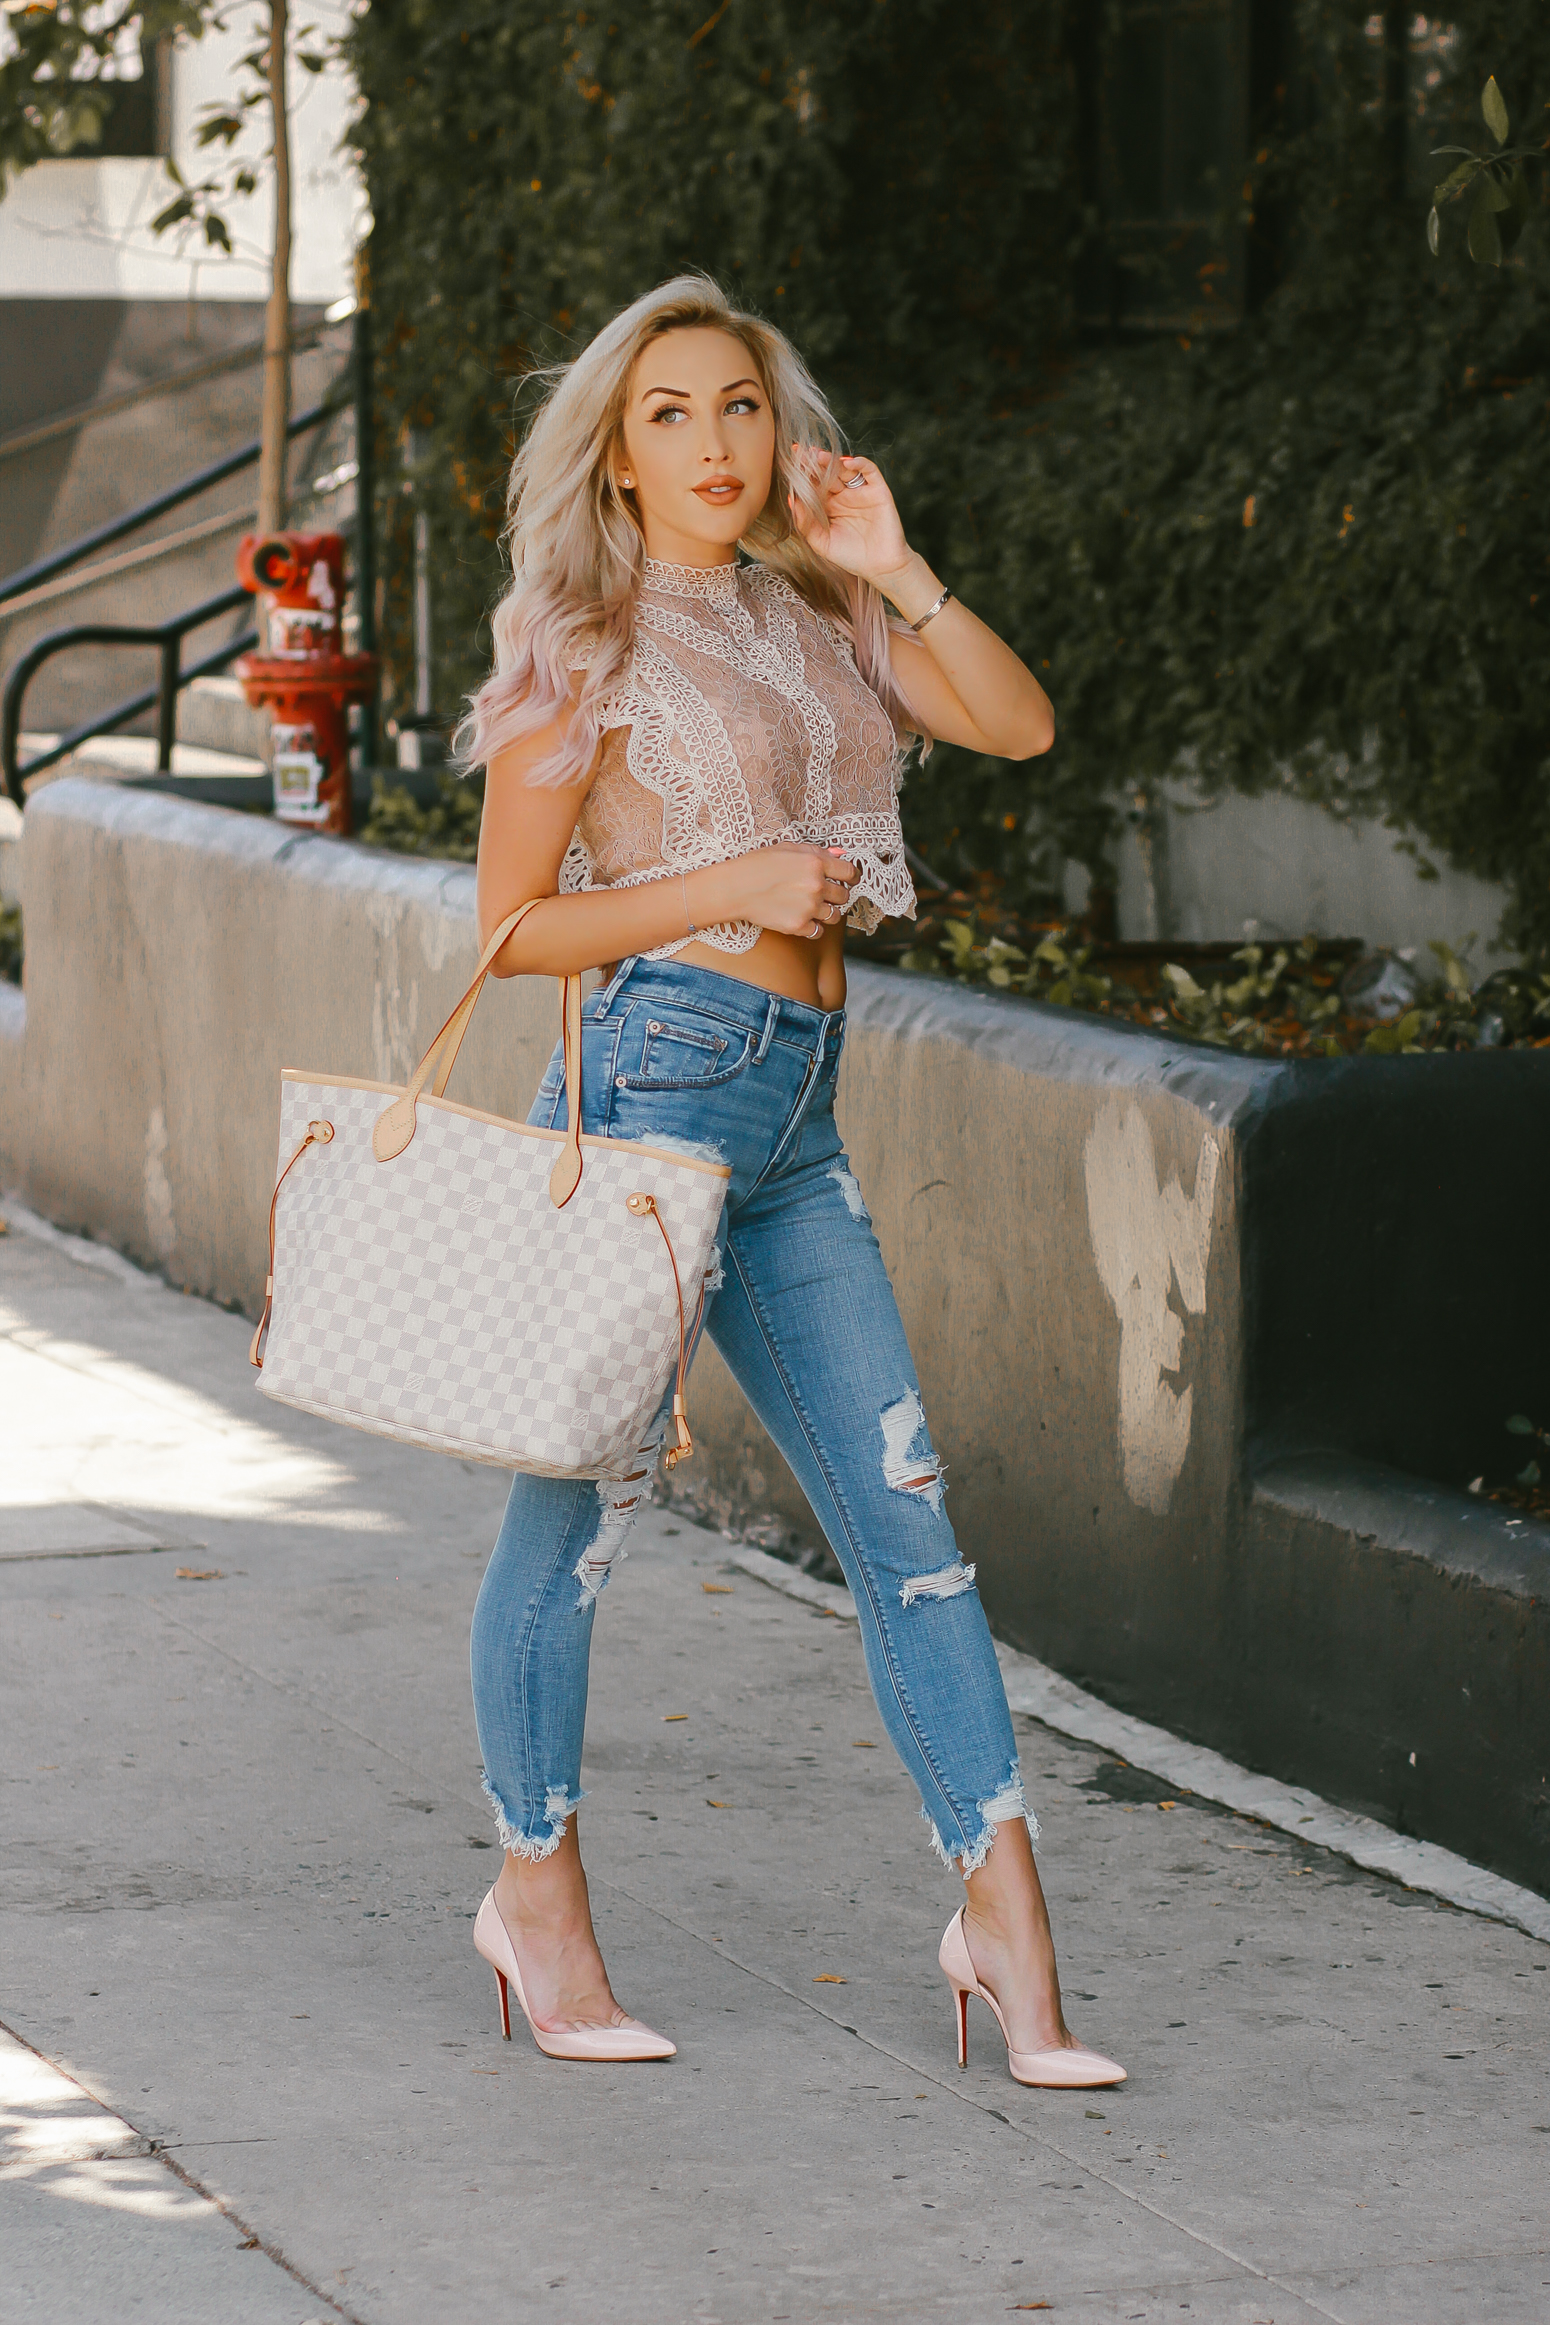 Blondie in the City |Distressed Jeans, Crochet & Lace Crop Top, Louis Vuitton Neverfull Bag